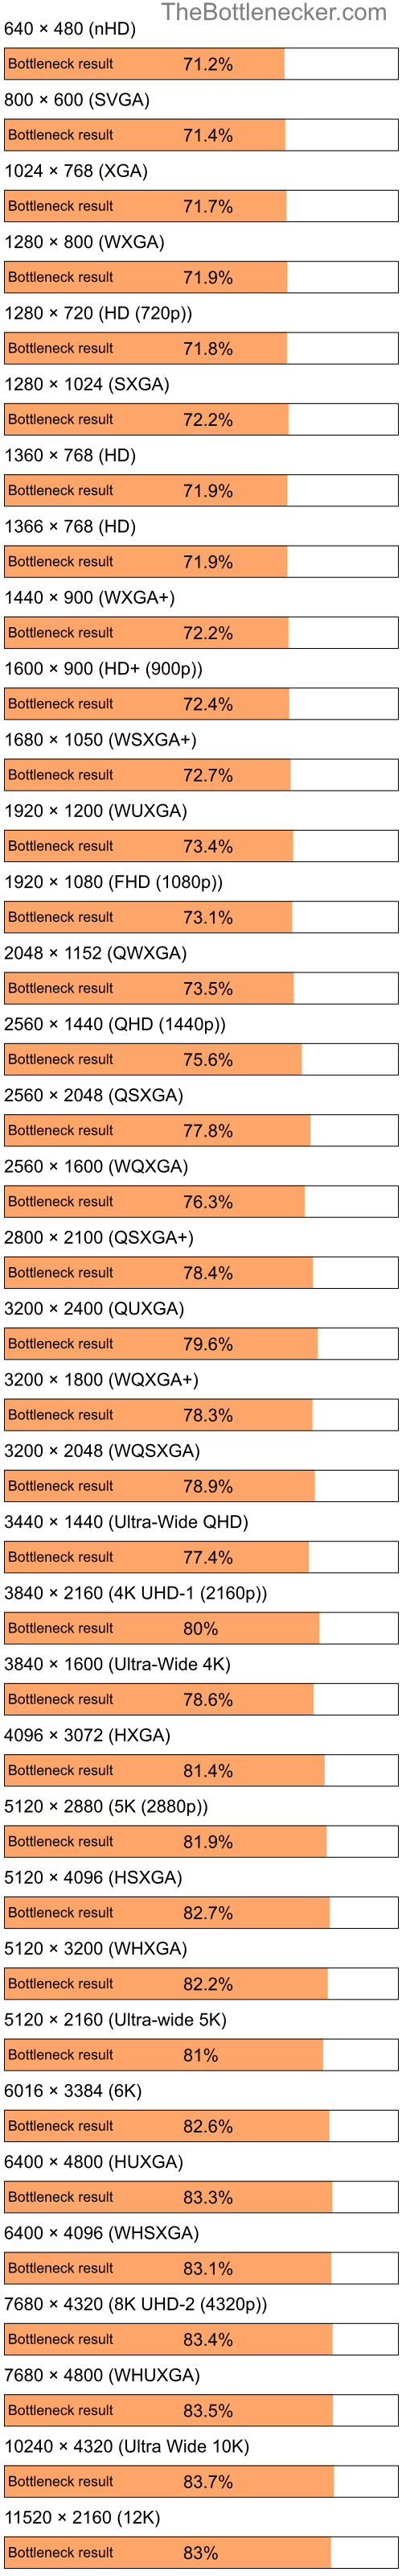 Bottleneck results by resolution for Intel Pentium 4 and AMD Radeon X1600 Pro in Graphic Card Intense Tasks